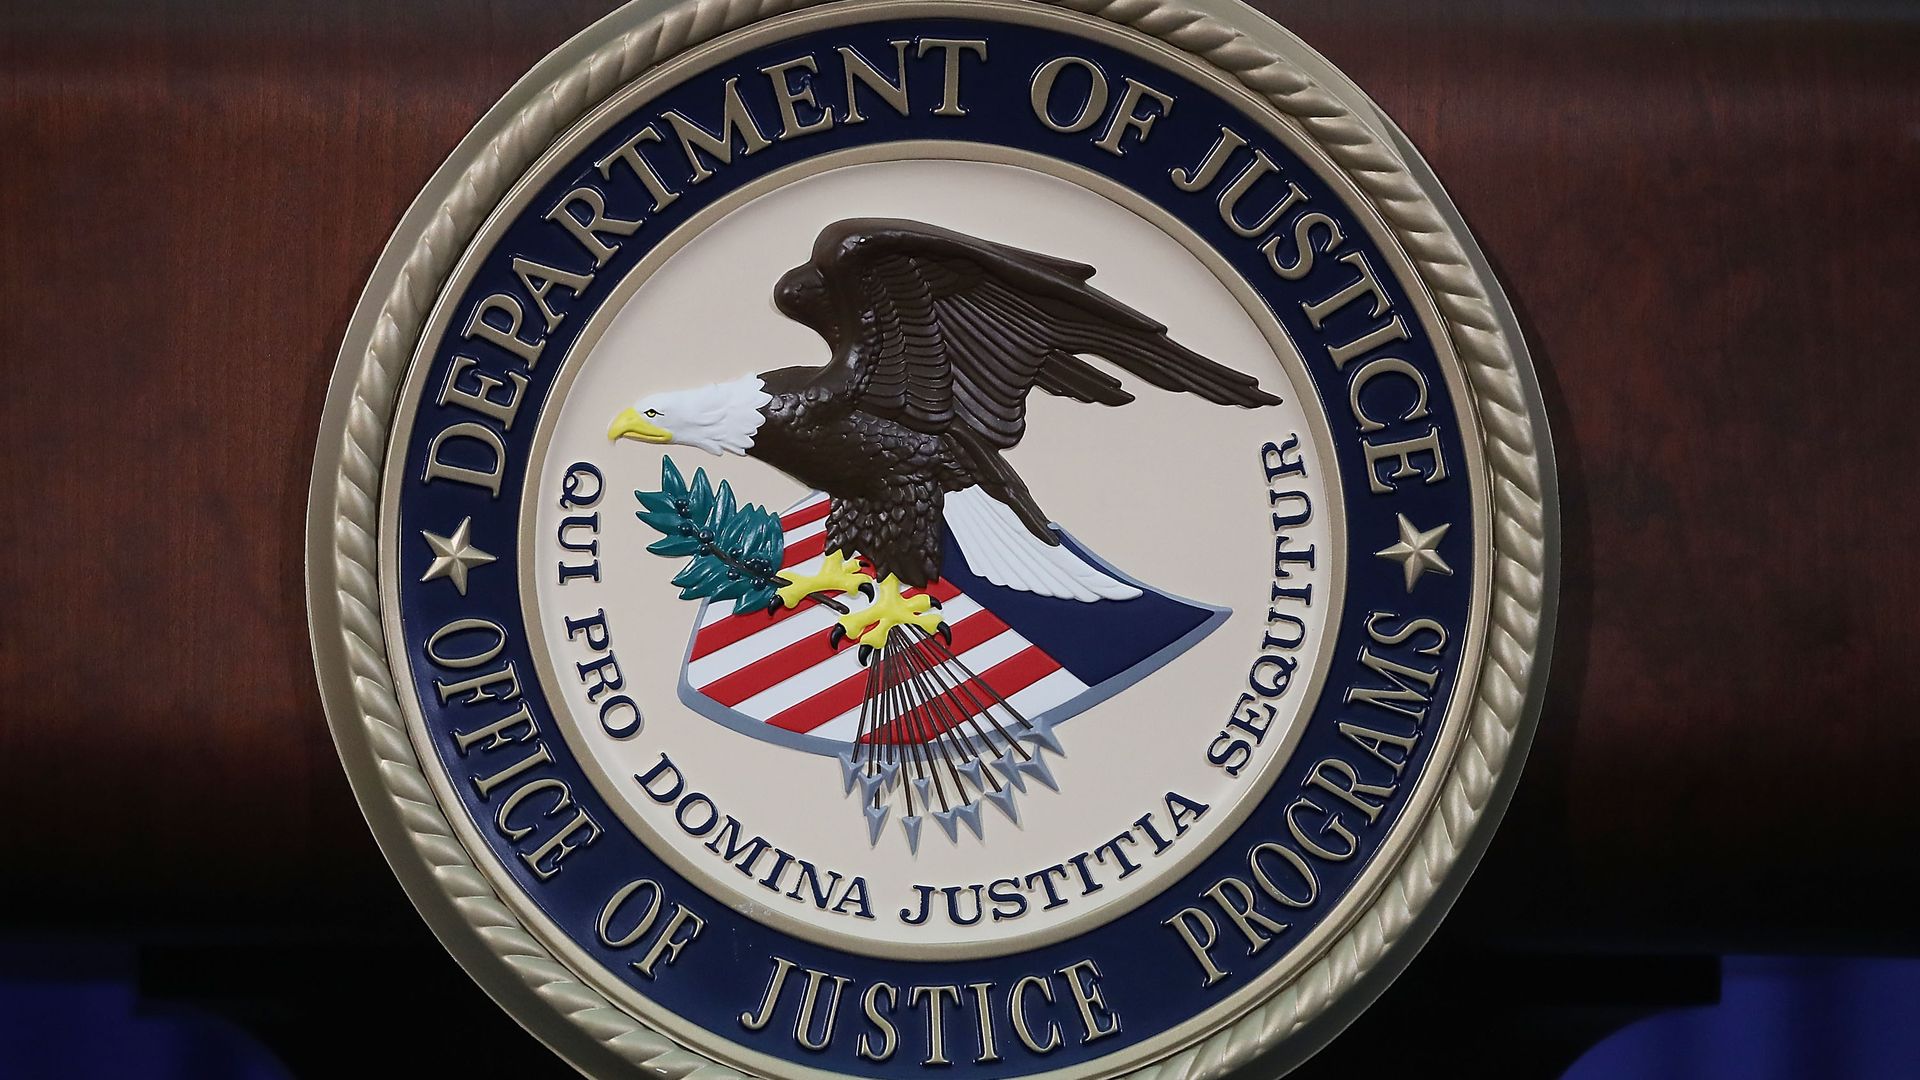 The Justice Department seal is seen on the lectern during a Hate Crimes Subcommittee summit on June 29, 2017.